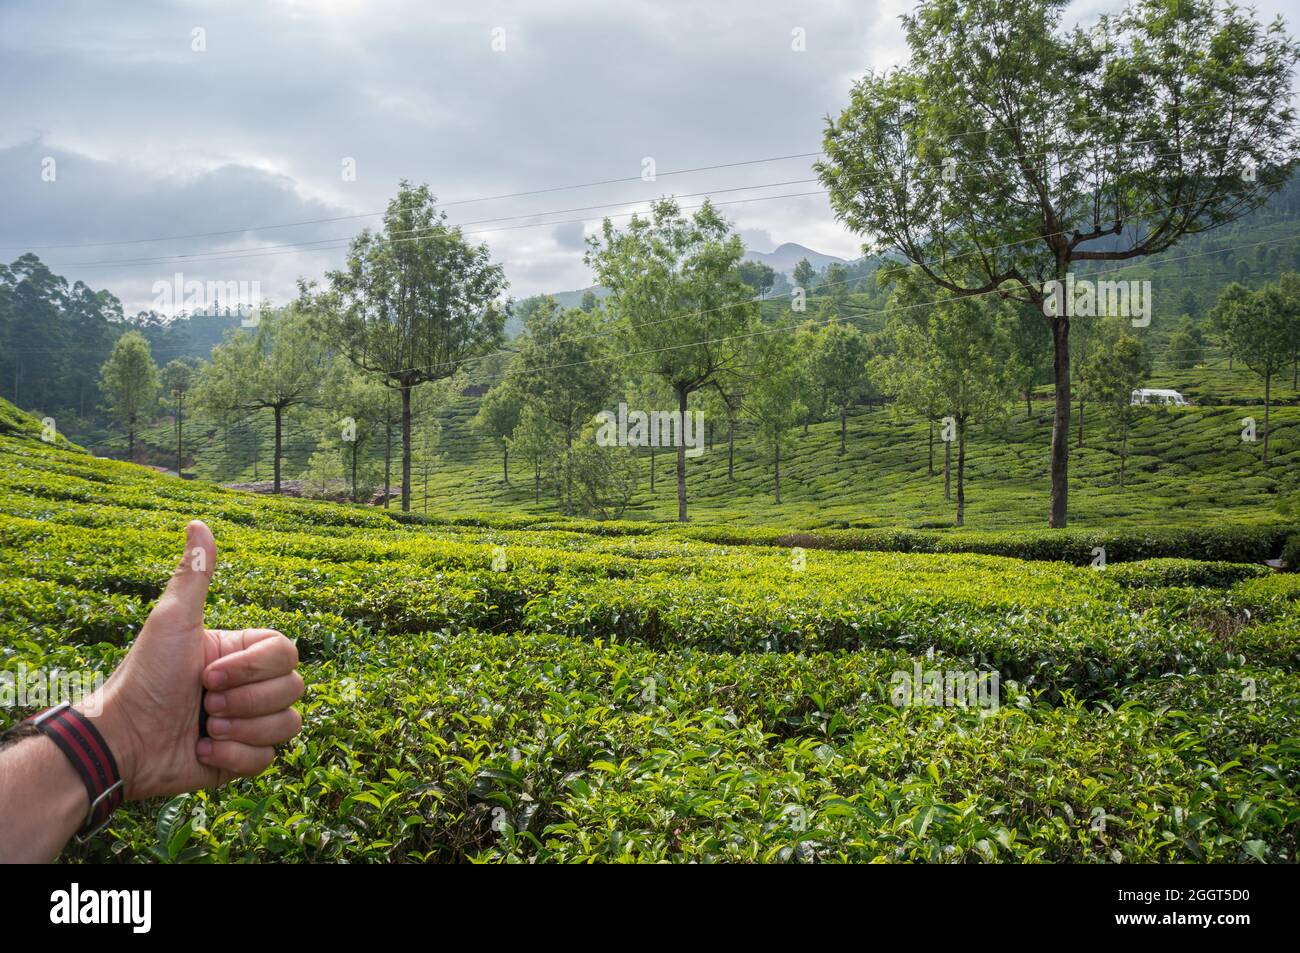 hand showing thumb up on the background of tea plantations. India, Munnar, Kerala.High mountain green tea on predam plan mountains in the background. Stock Photo